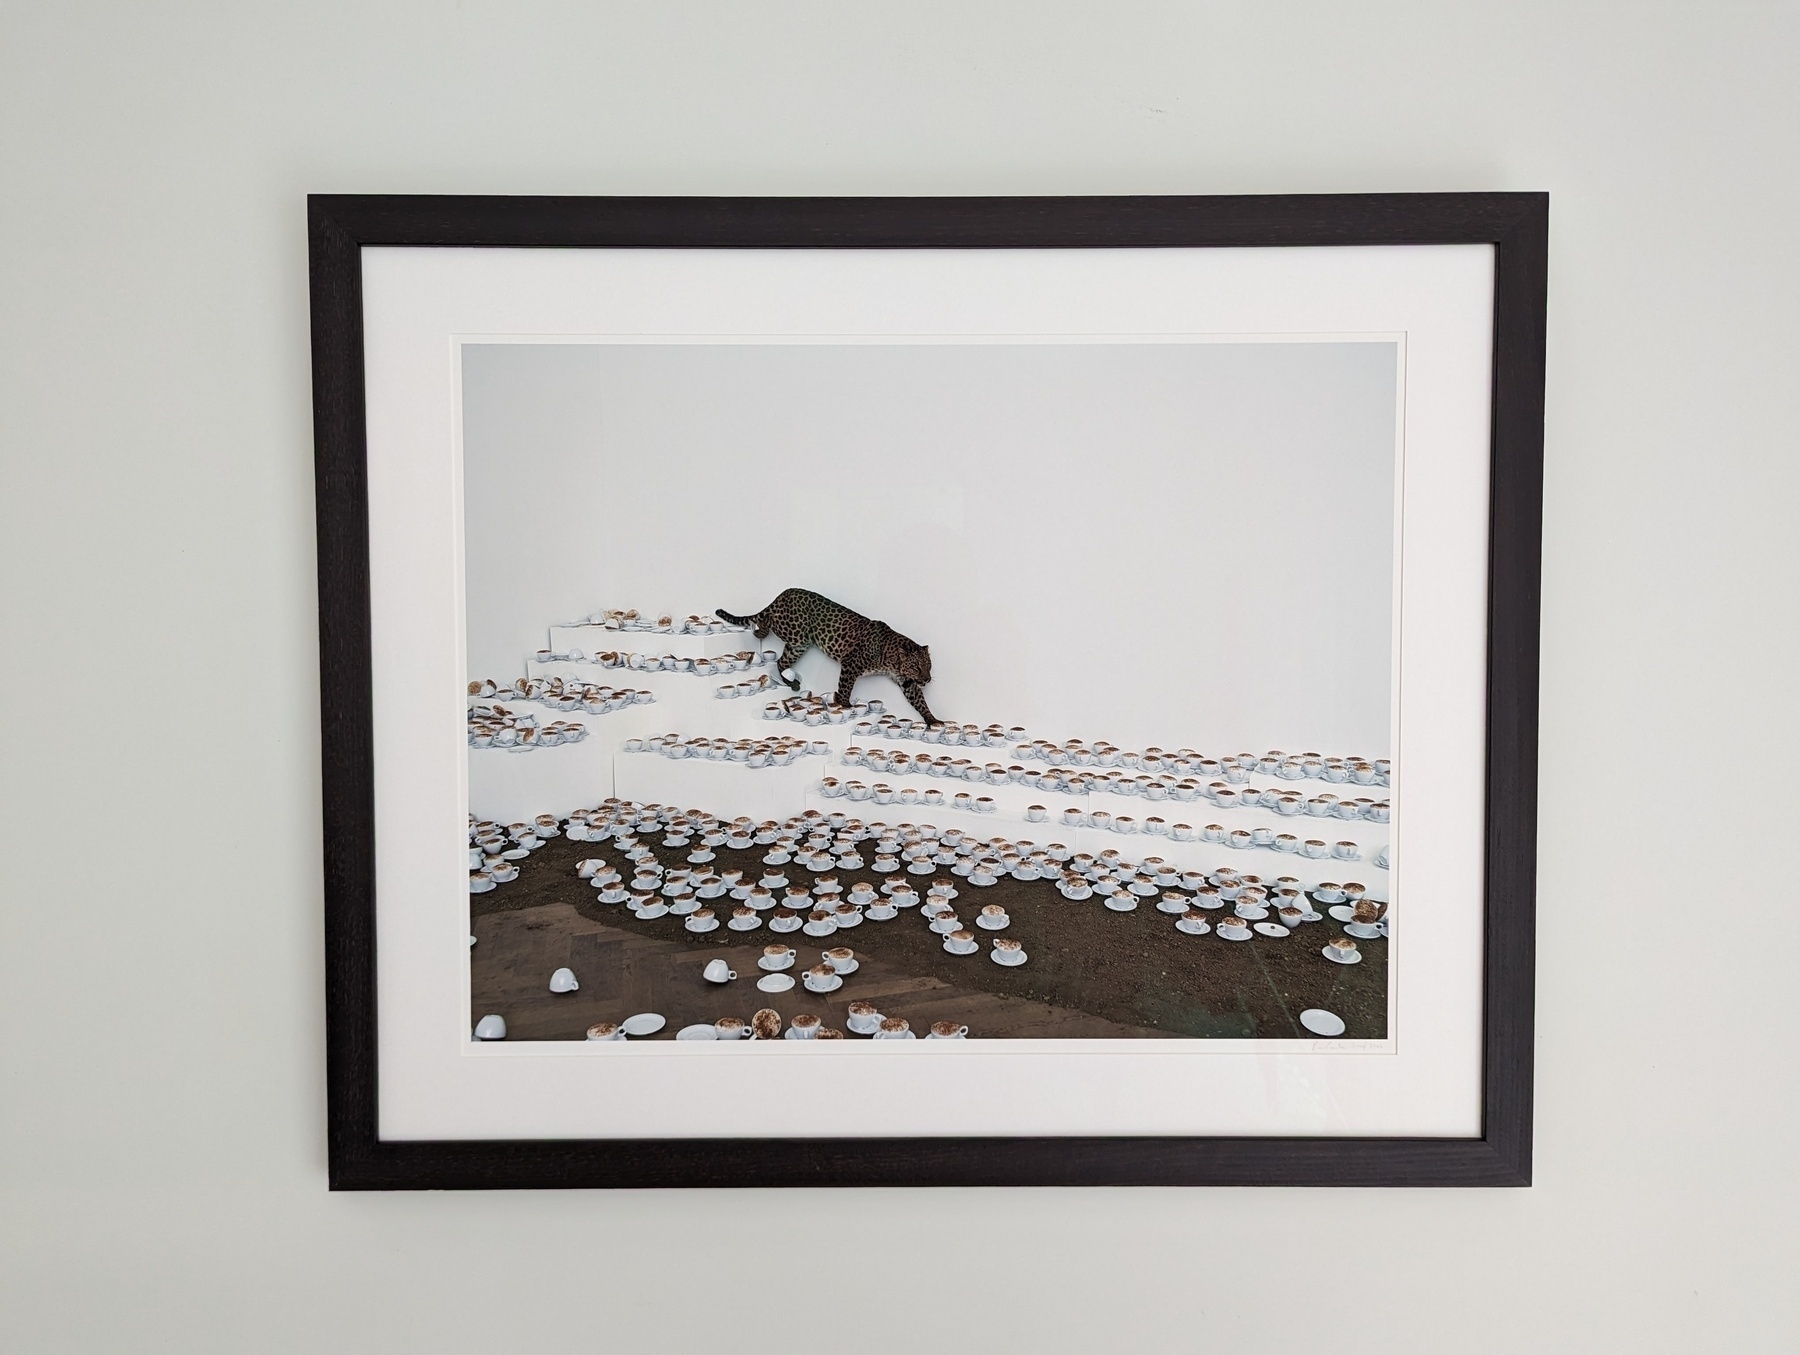 Framed print of 'One Cup of Cappuccino Then I Go' by Paola Pivi. Print features a scene of many cappucinos on the ground with a leopard walking in the background.